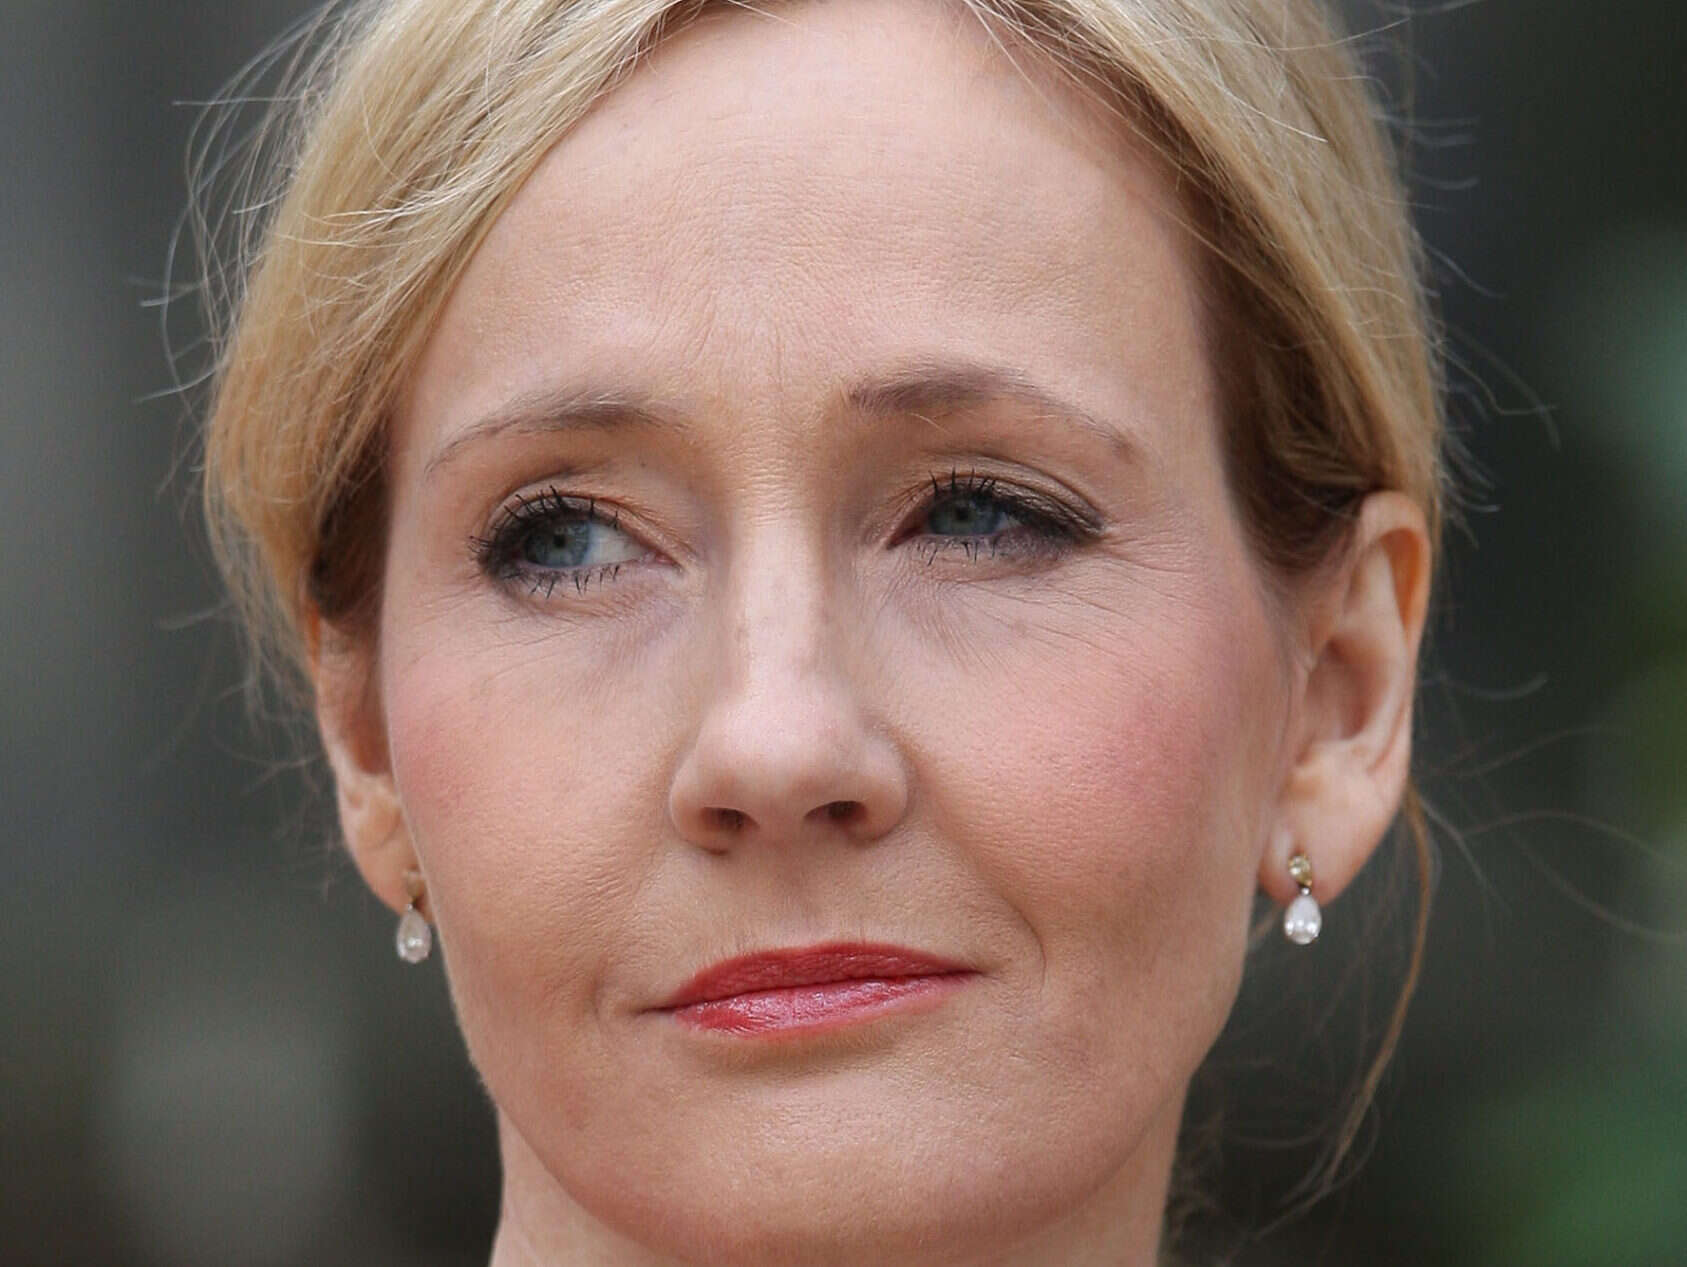 Website for teens The Day agrees payout and apology over JK Rowling 'trans tweet' story